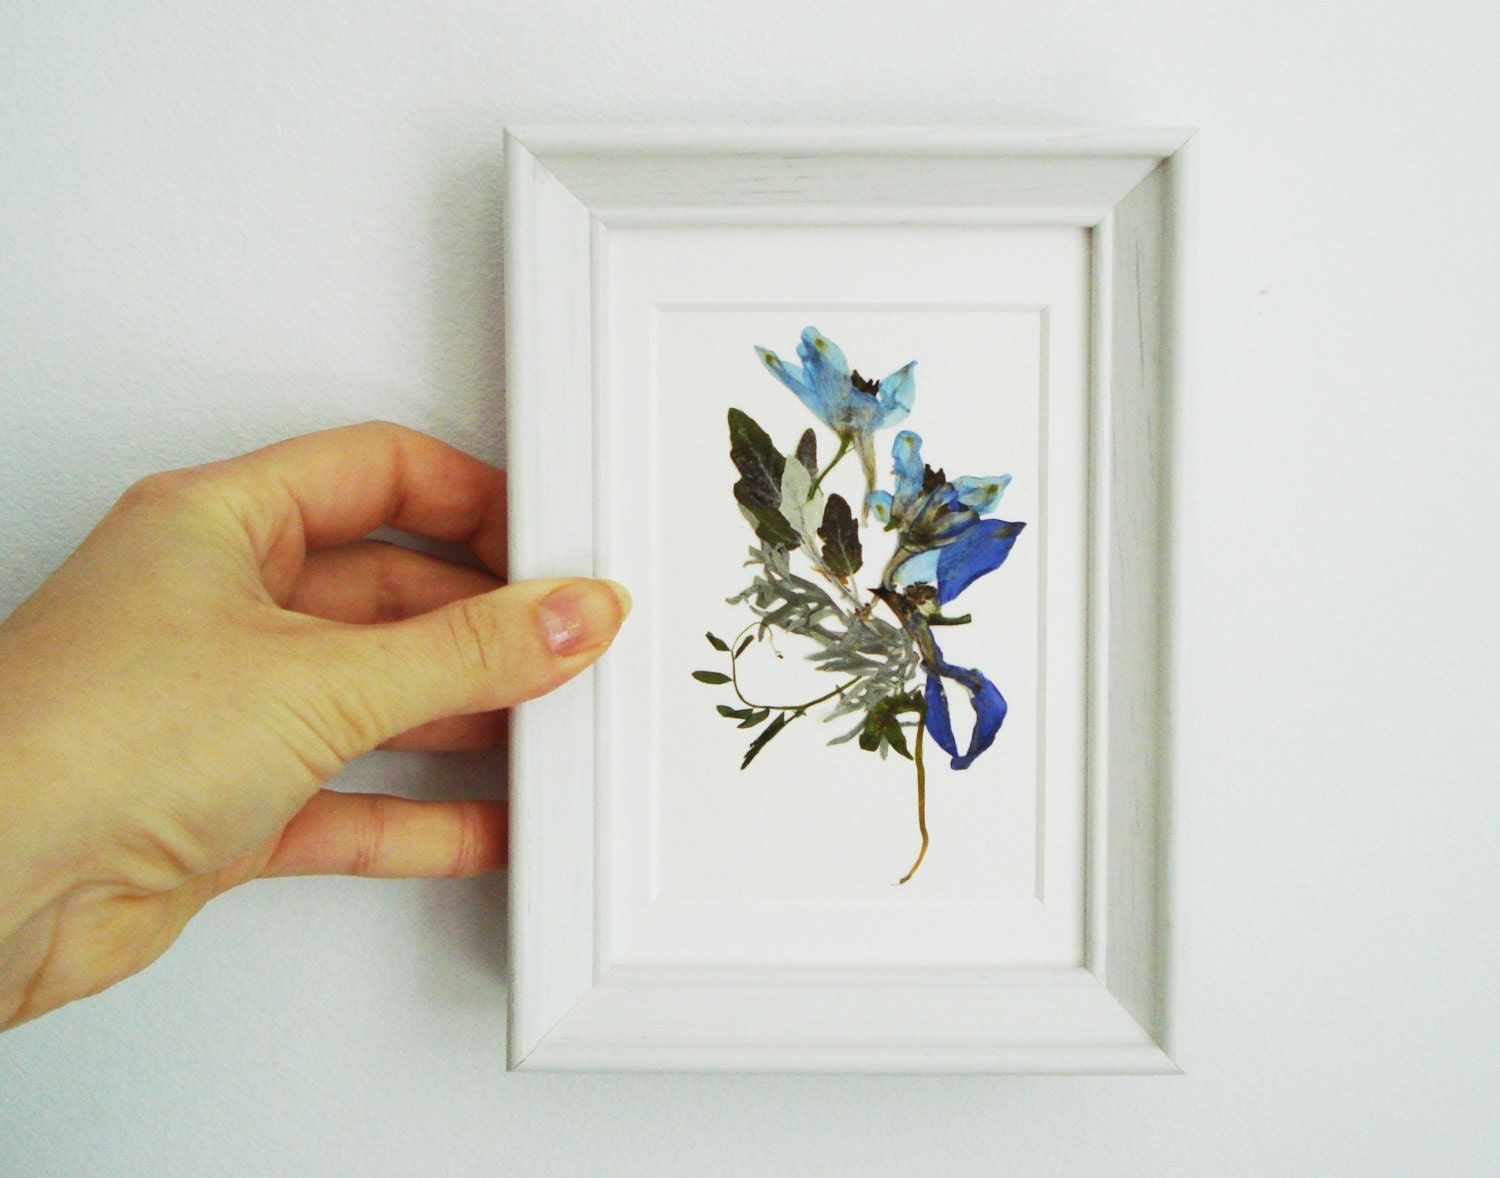 Pressed Flowers Framed Dried Flowers Framed Art Pressed With Regard To Newest Flower Framed Art Prints (View 16 of 20)